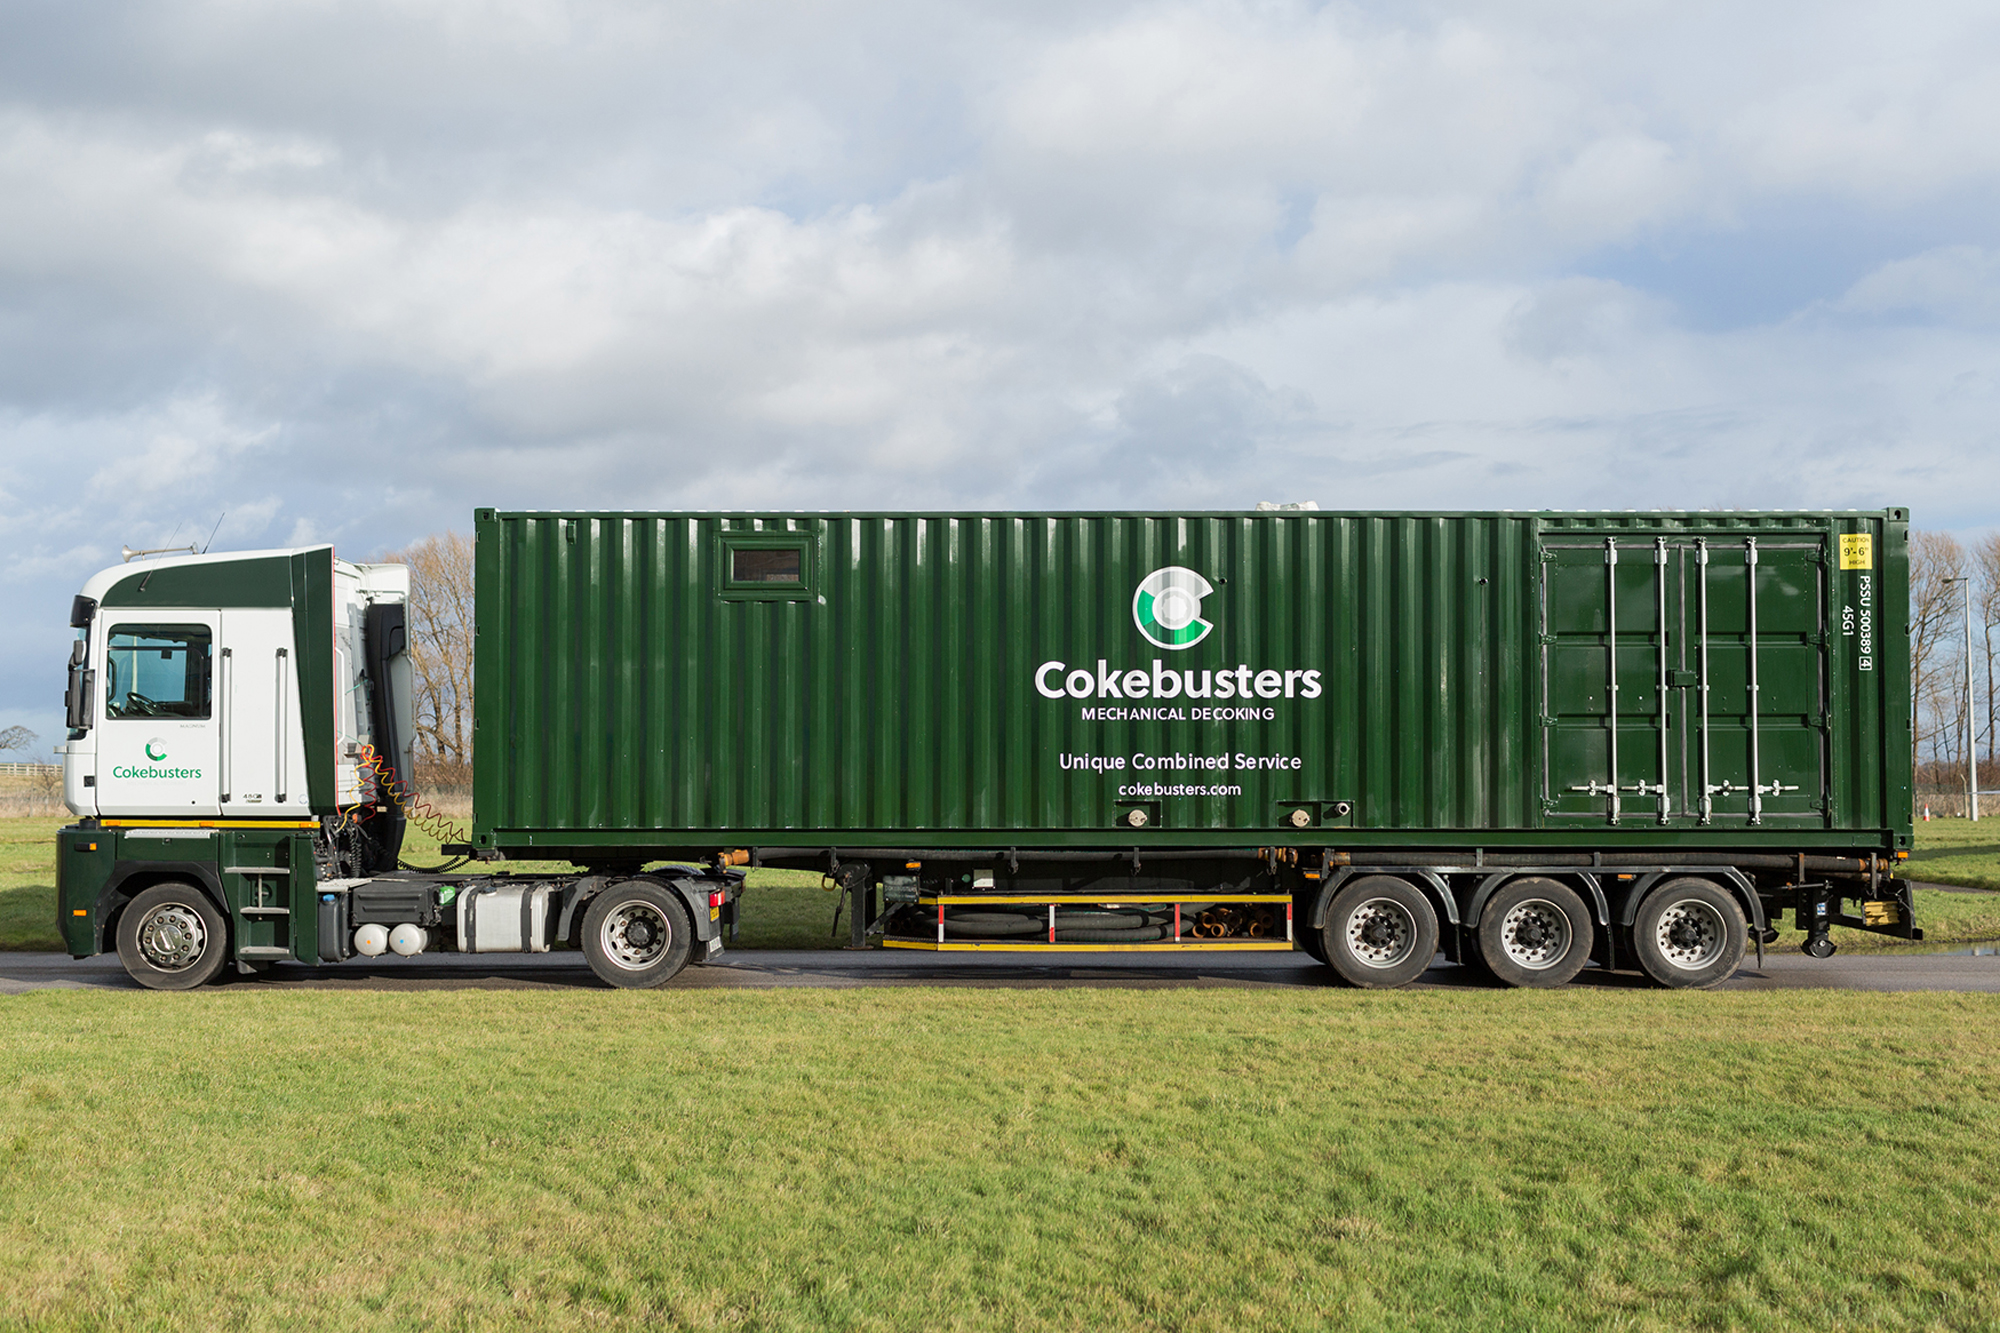 Cokebusters specialist containerised Double Pumping Unit for mechanical decoking and cleaning